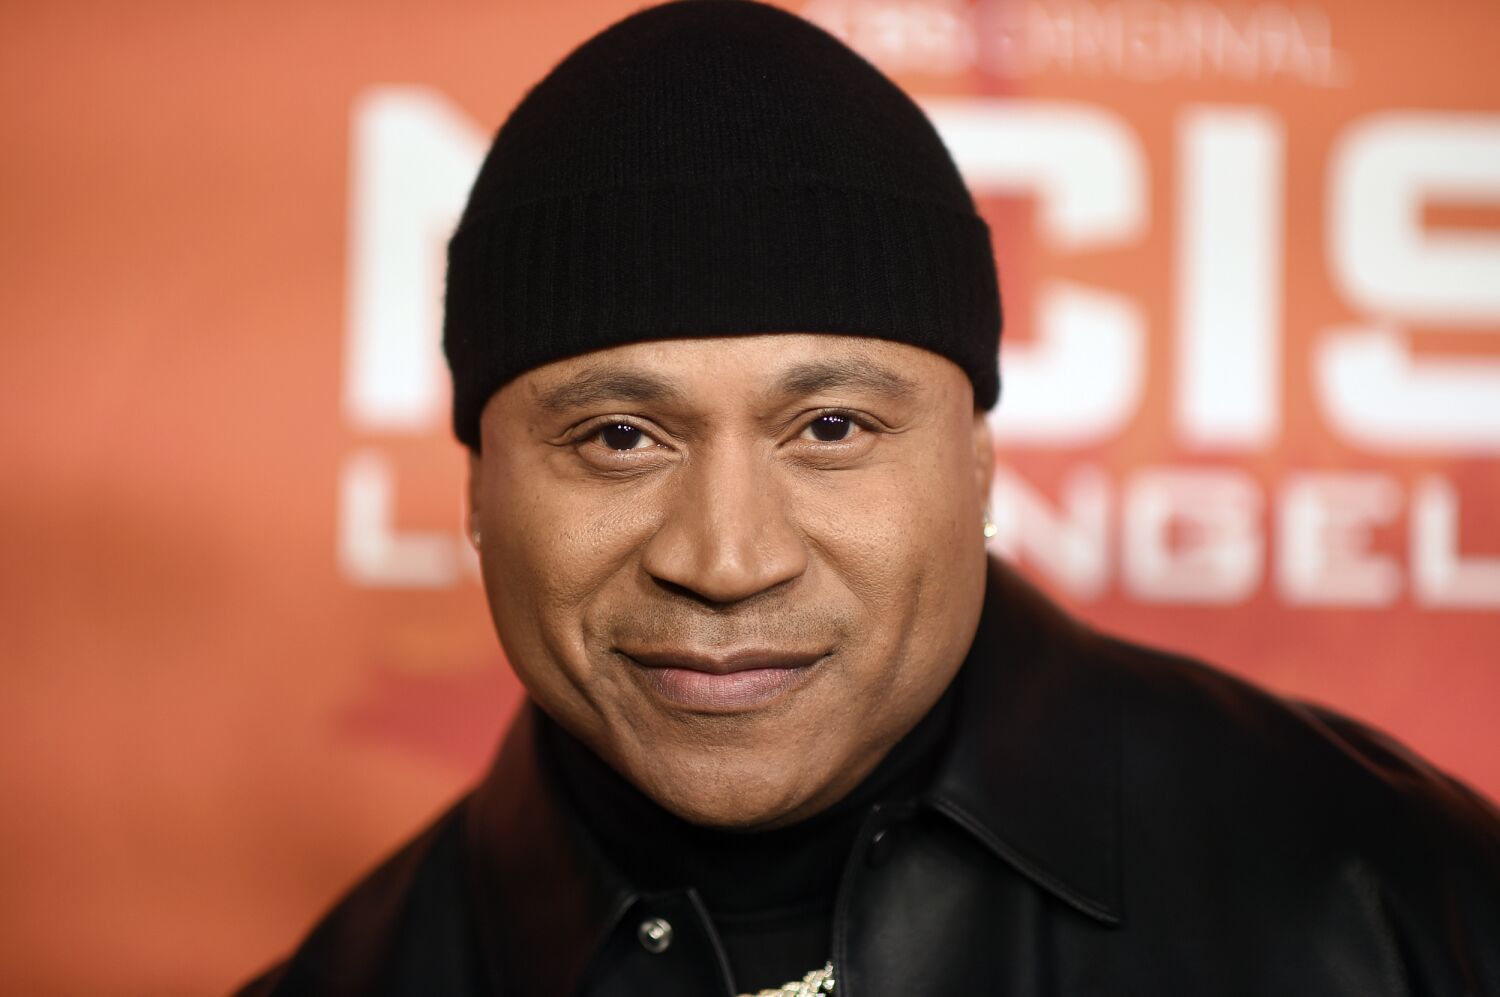 LL Cool J just returned to 'NCIS' in a finale cameo. Looks like he's there to stay